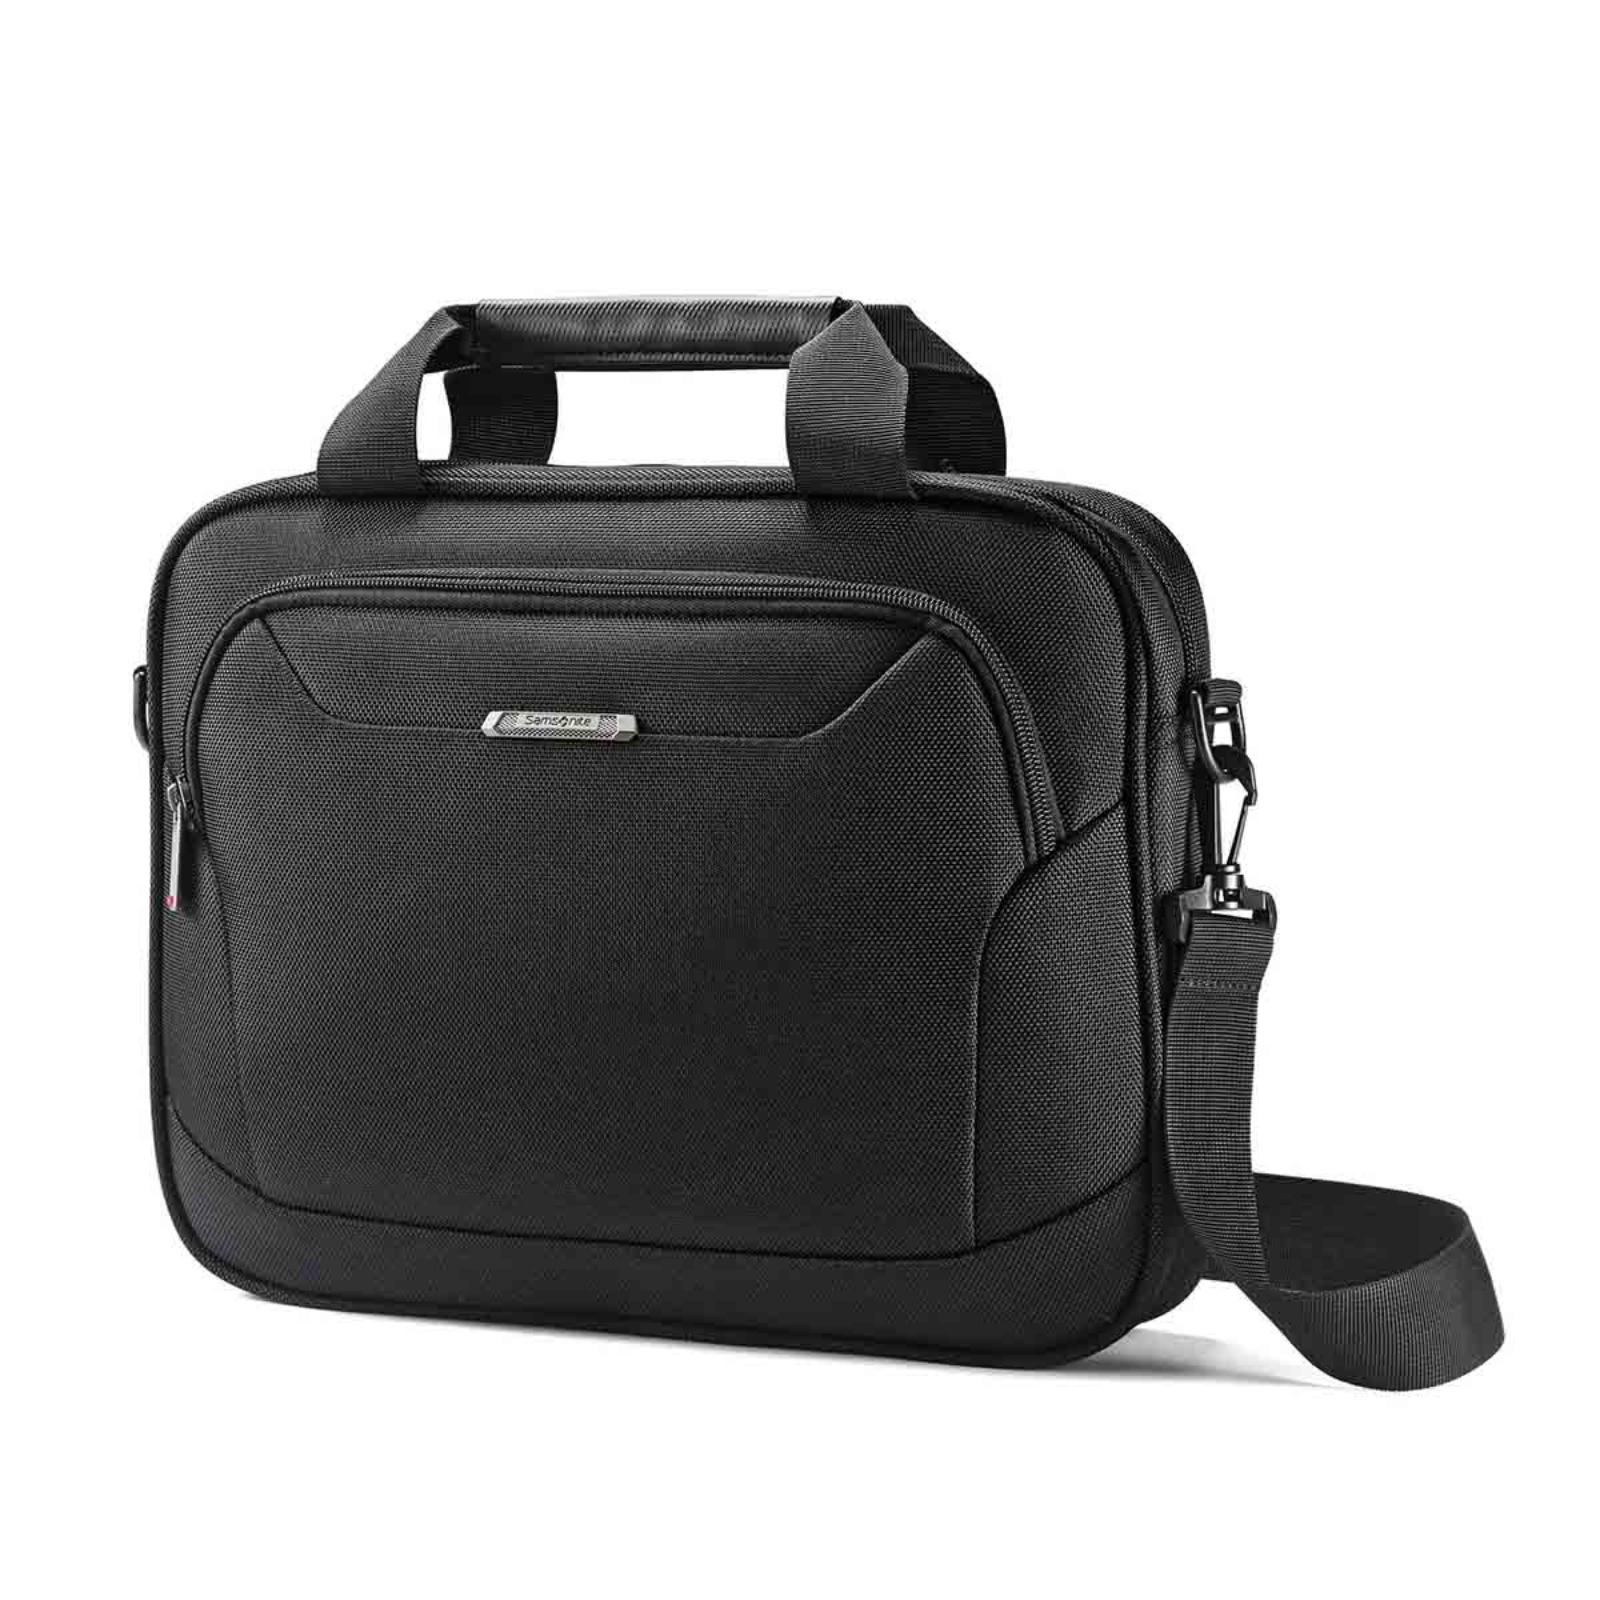 Samsonite_Xenon_3.0_13inch_Laptop_Briefcase_Front.png